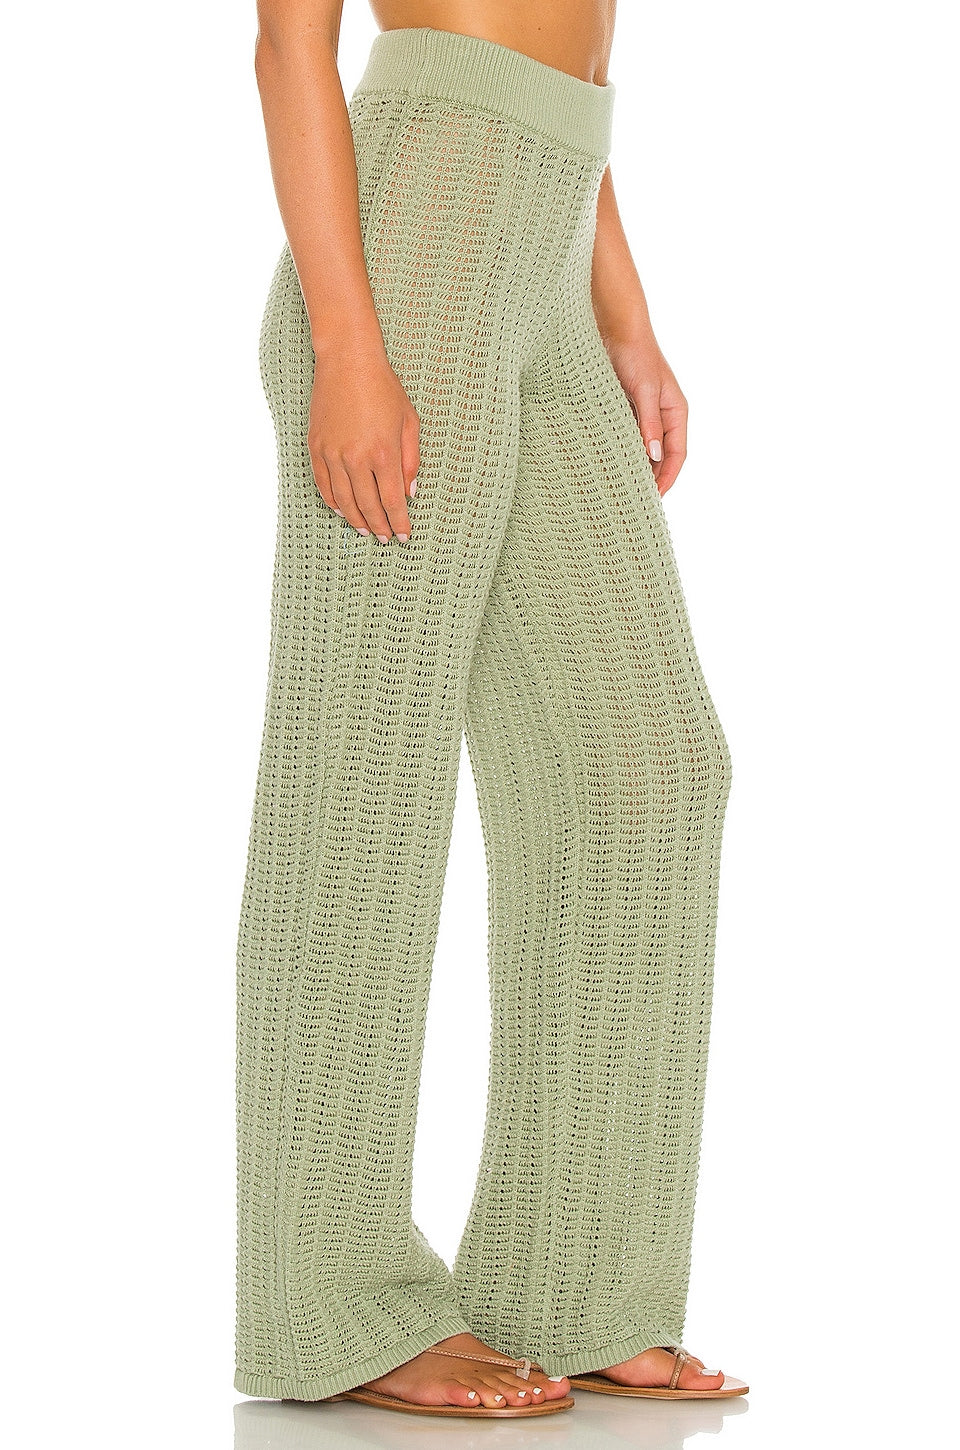 Maeve Knit Pants in SAGE